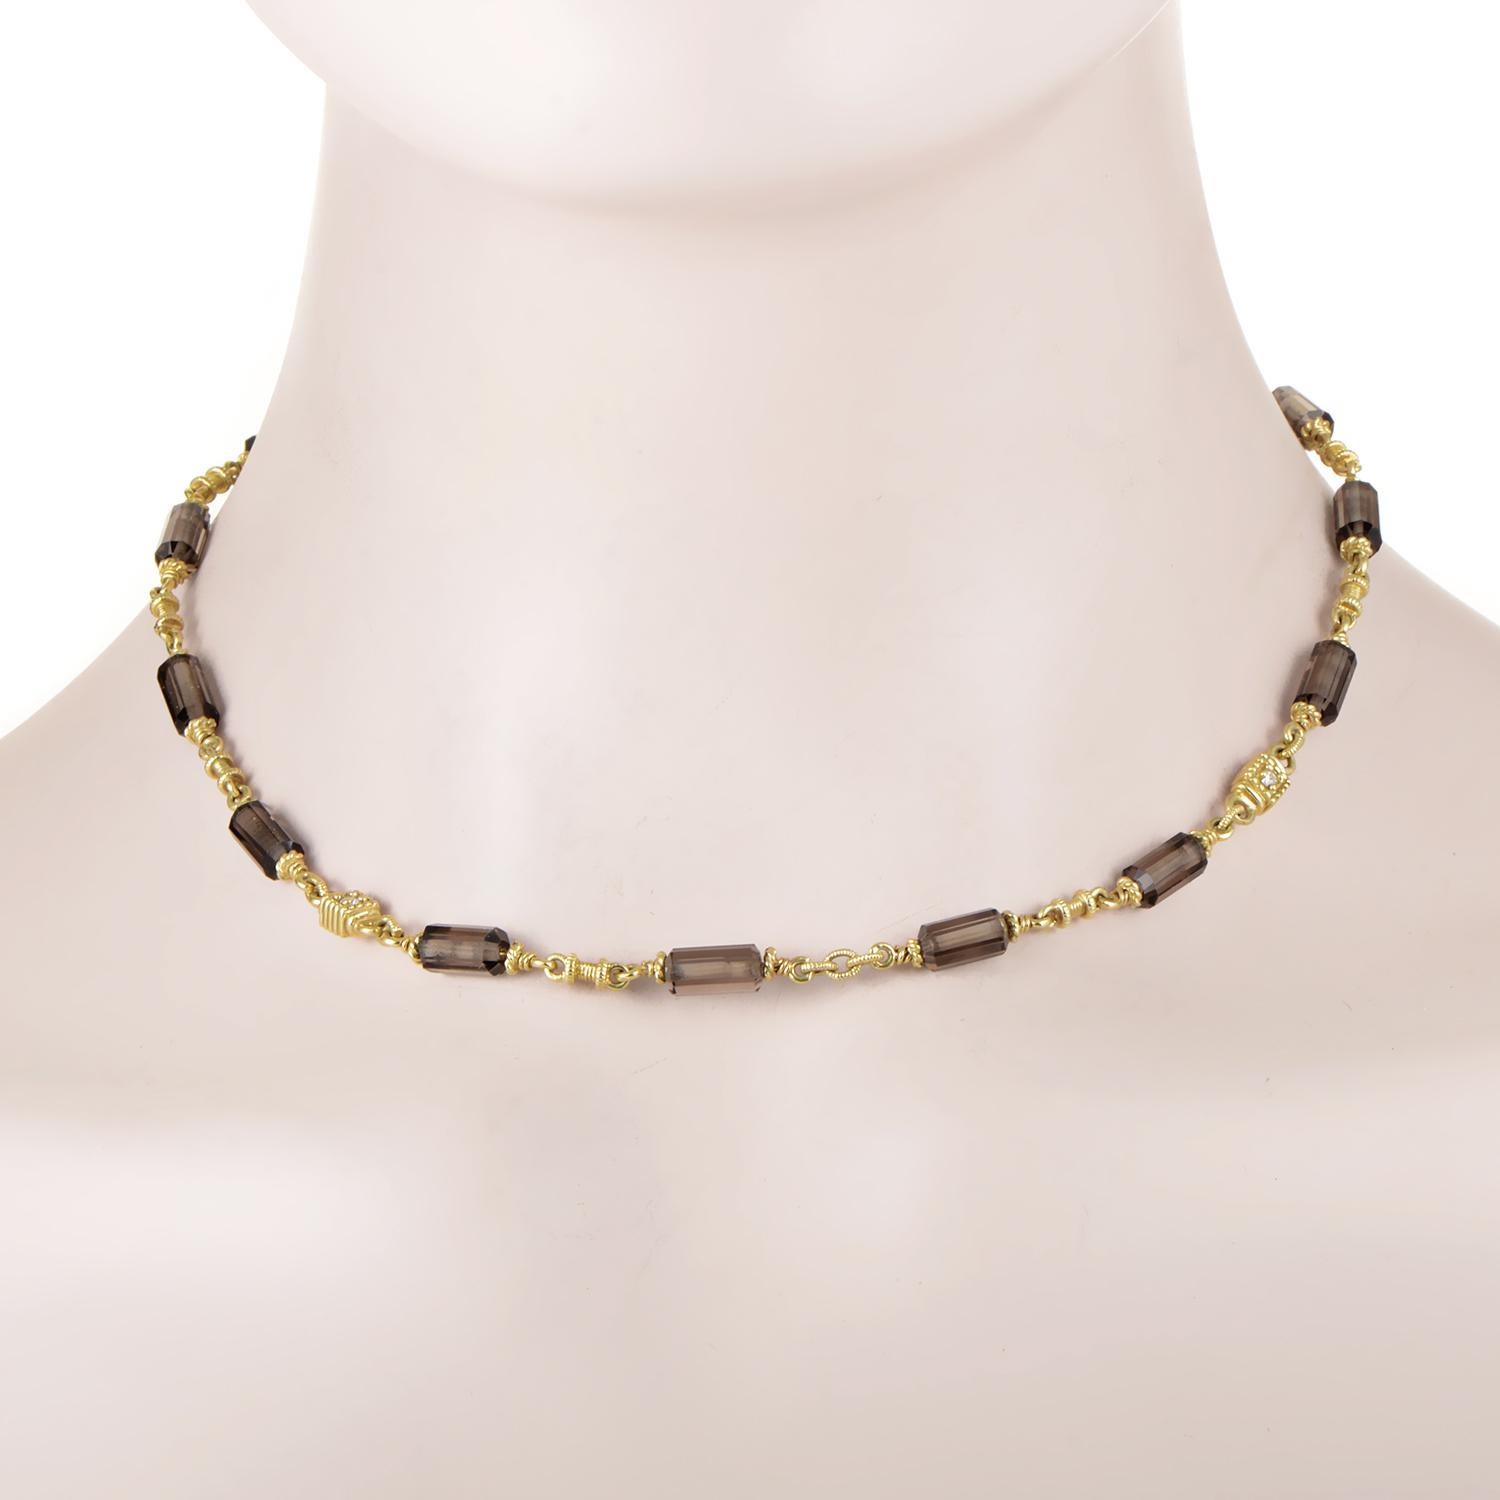 Made of intricately ornamented 18K yellow gold and enchanting smoky quartz stones of appealing shape and compelling nuance, this spellbinding necklace from Judith Ripka also boasts a delicate 0.10ct diamond at the clasp.
